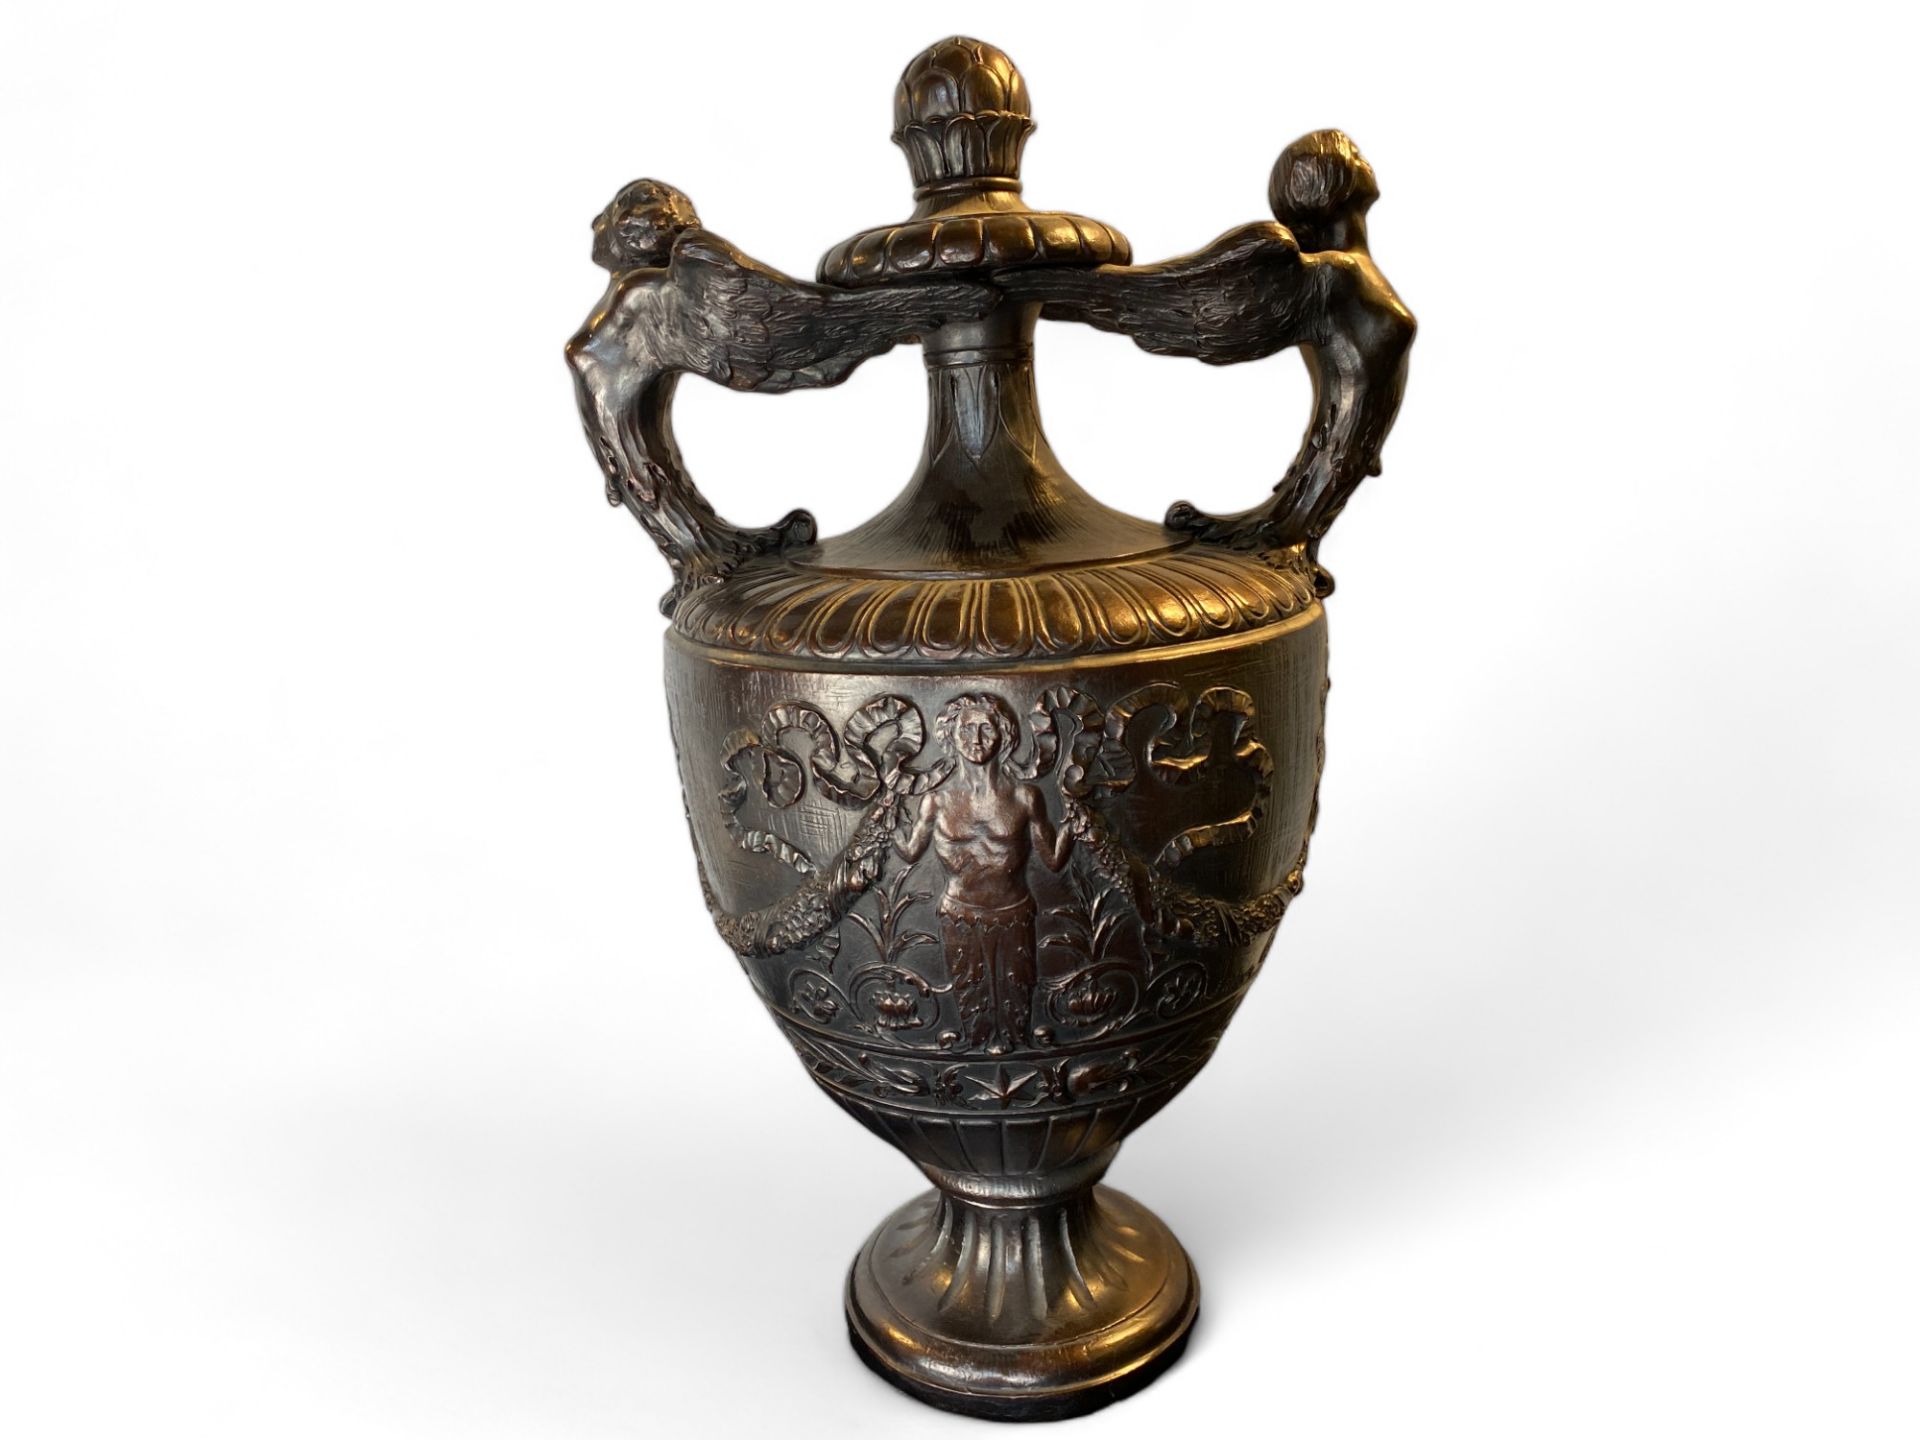 A large early 20th century terracotta classical twin handled urn with a metallic bronzed glaze - Image 5 of 7